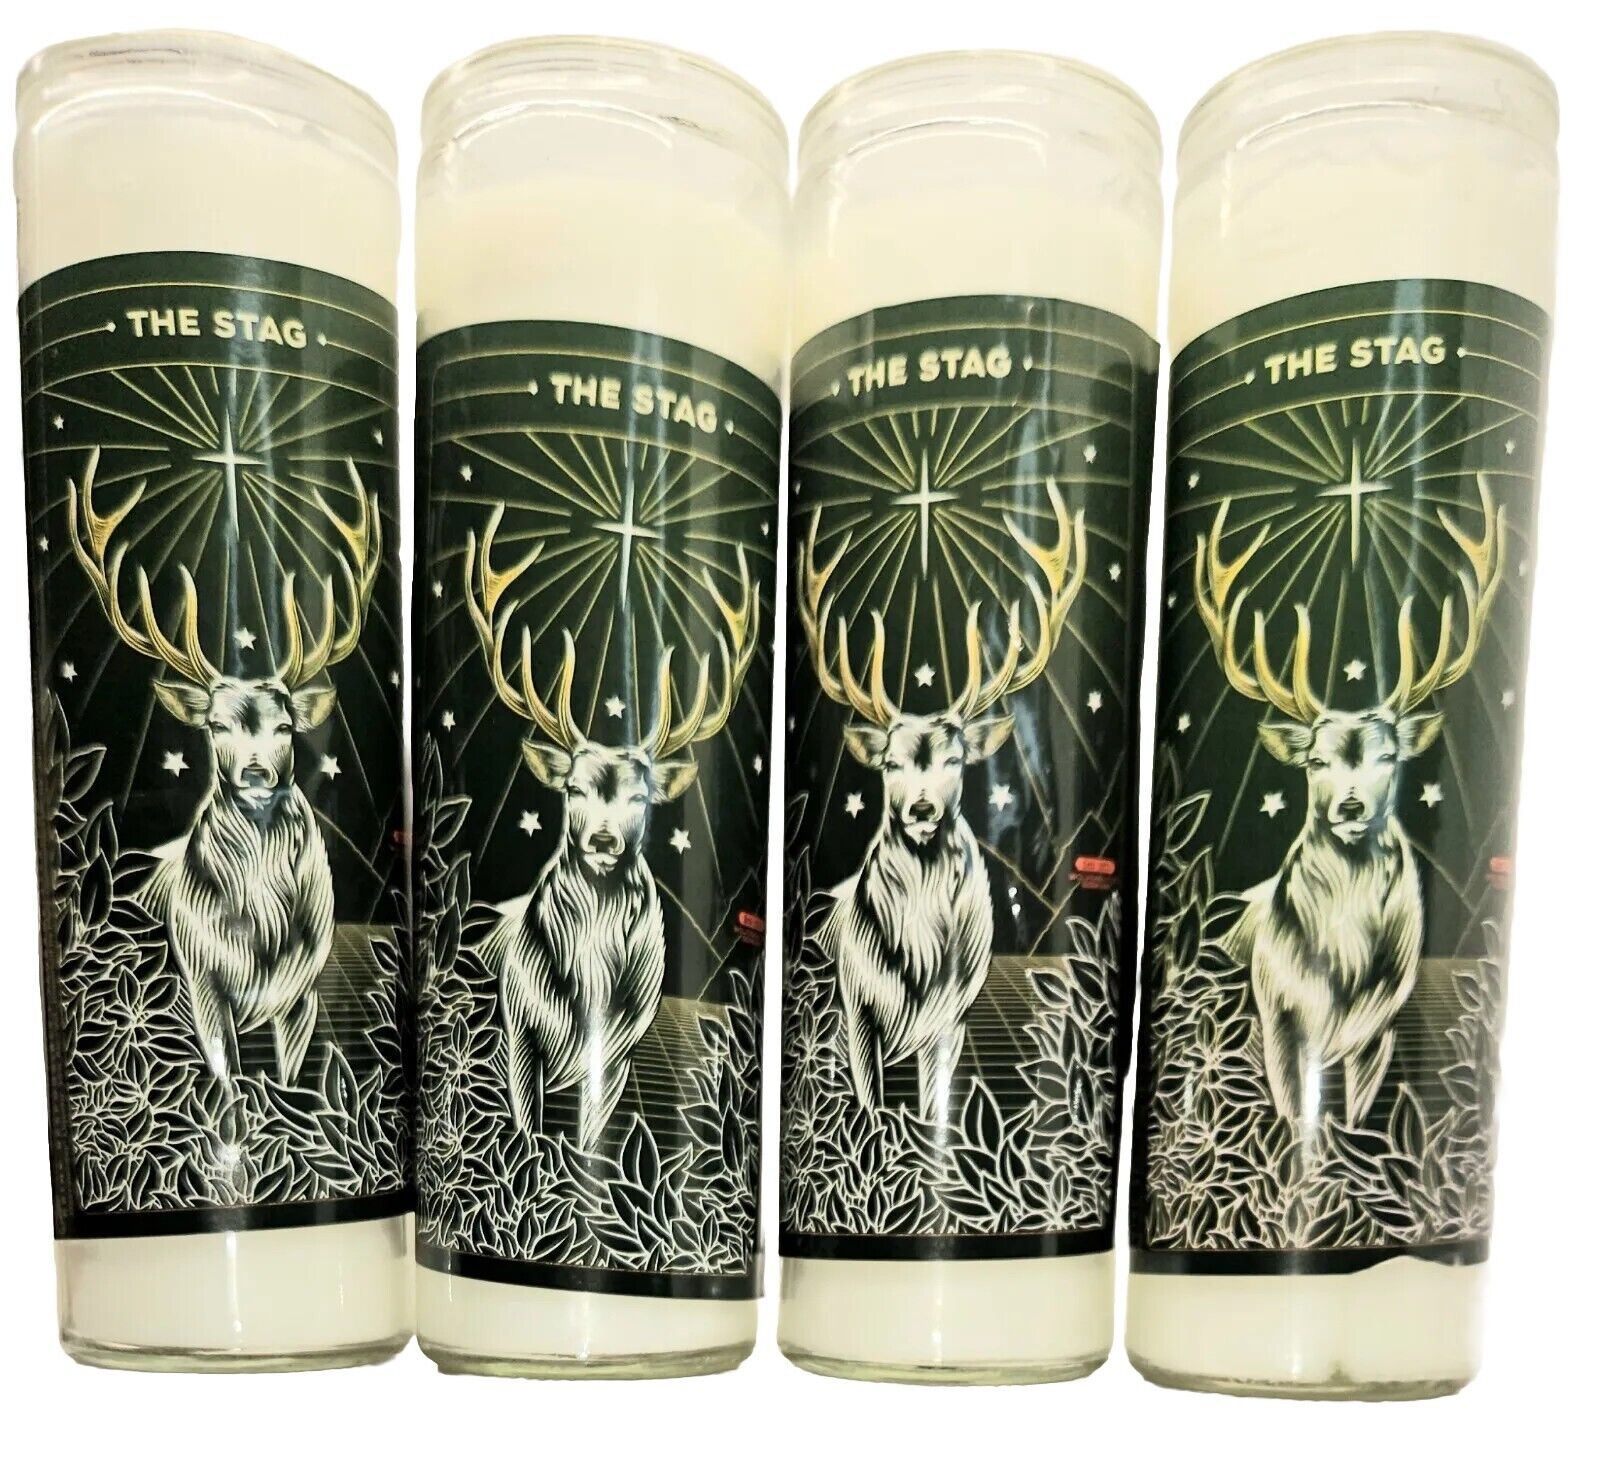 JAGERMEISTER “THE STAG” Promo Glass Candle 8\